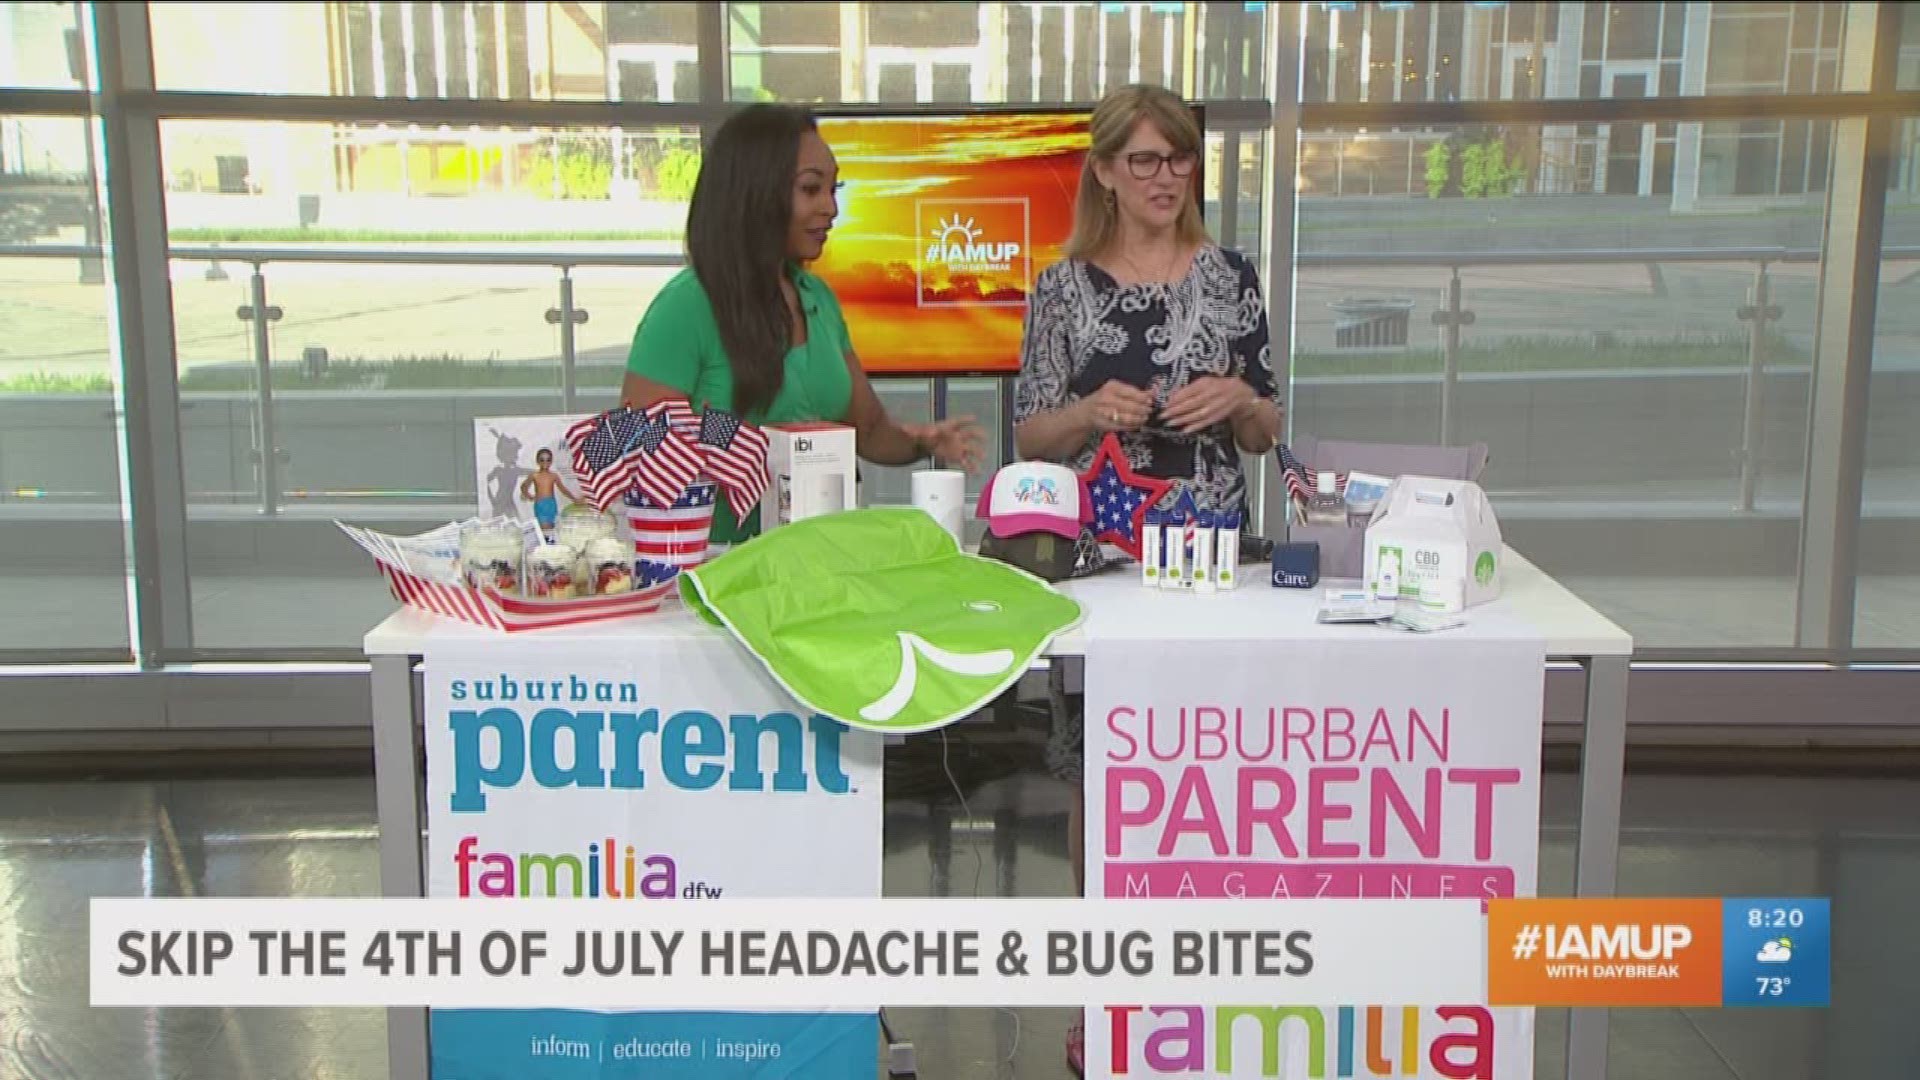 Mary Ellen Caldwell, editor and publisher of "Suburban Parent Magazine", put together a family fun pack to ward off things that might ruin your fun.